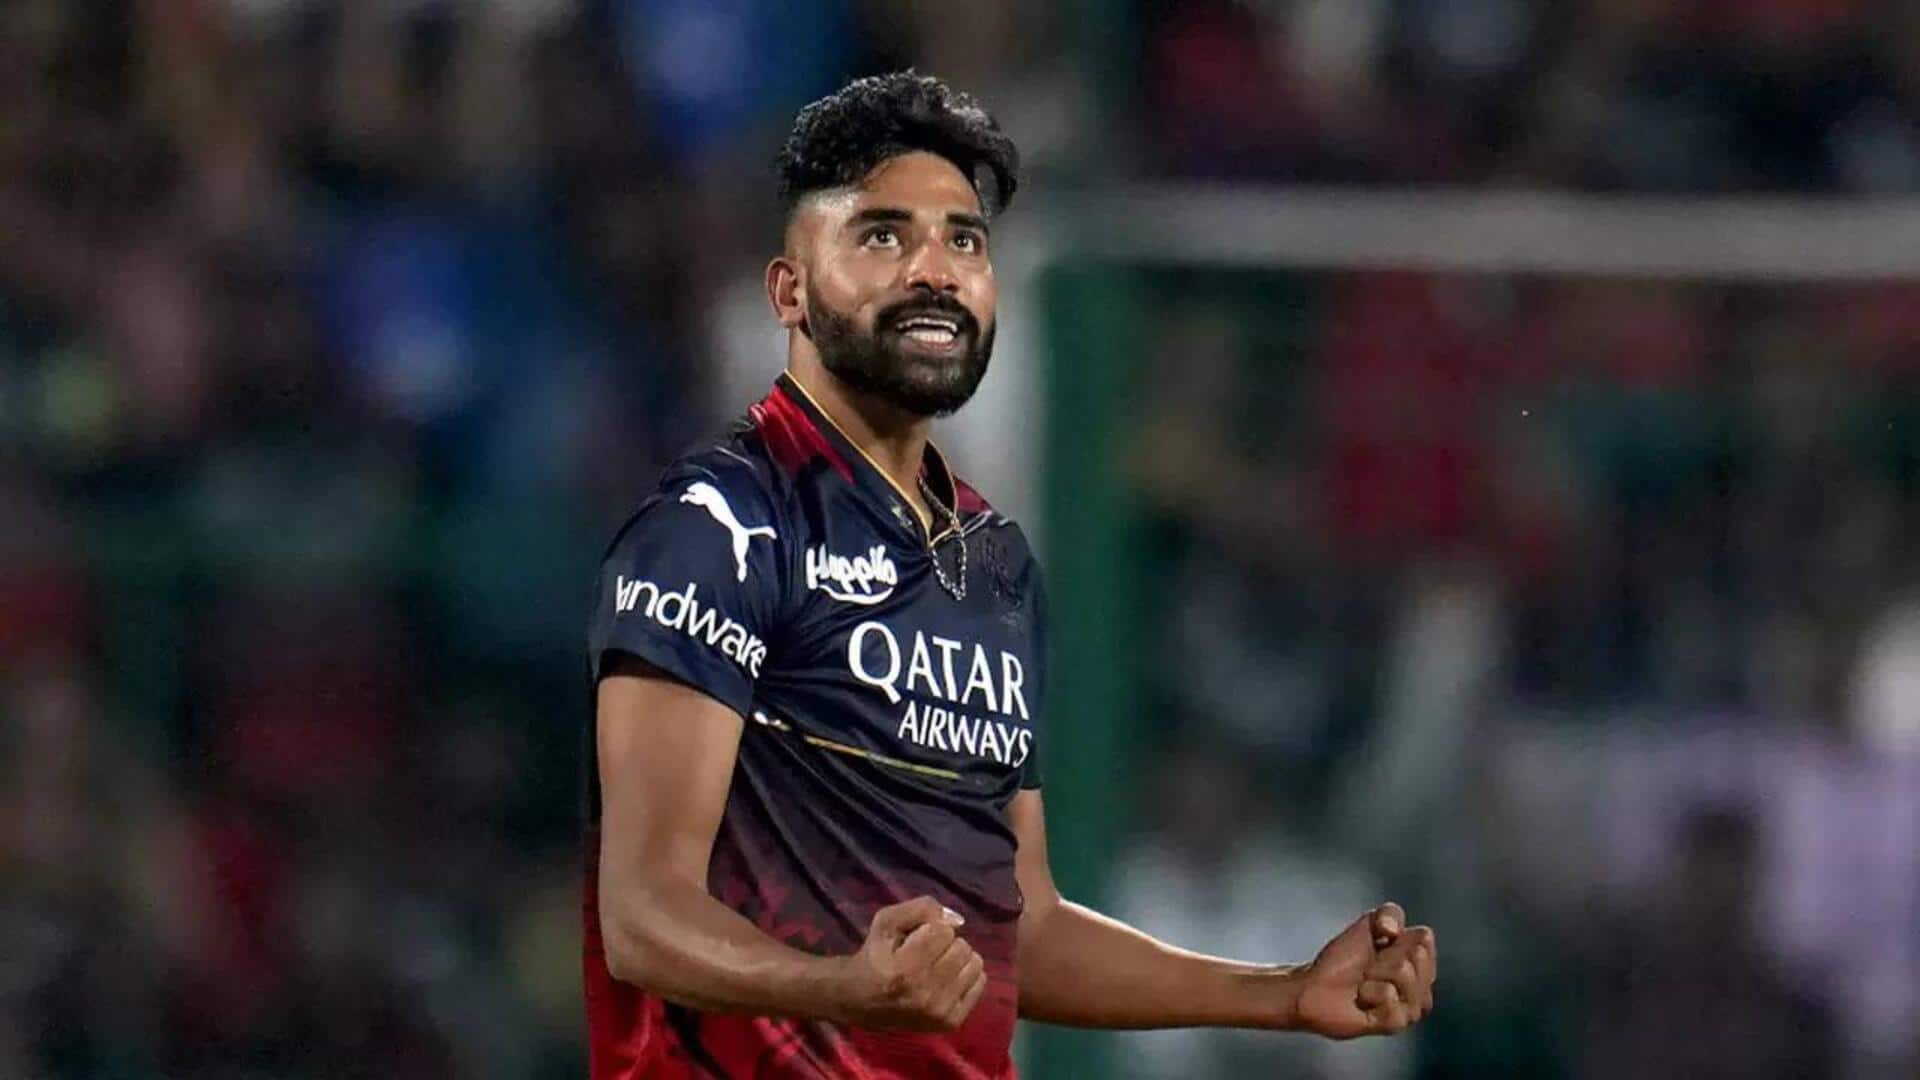 Mohammed Siraj becomes third-highest wicket-taker for RCB in IPL: Stats